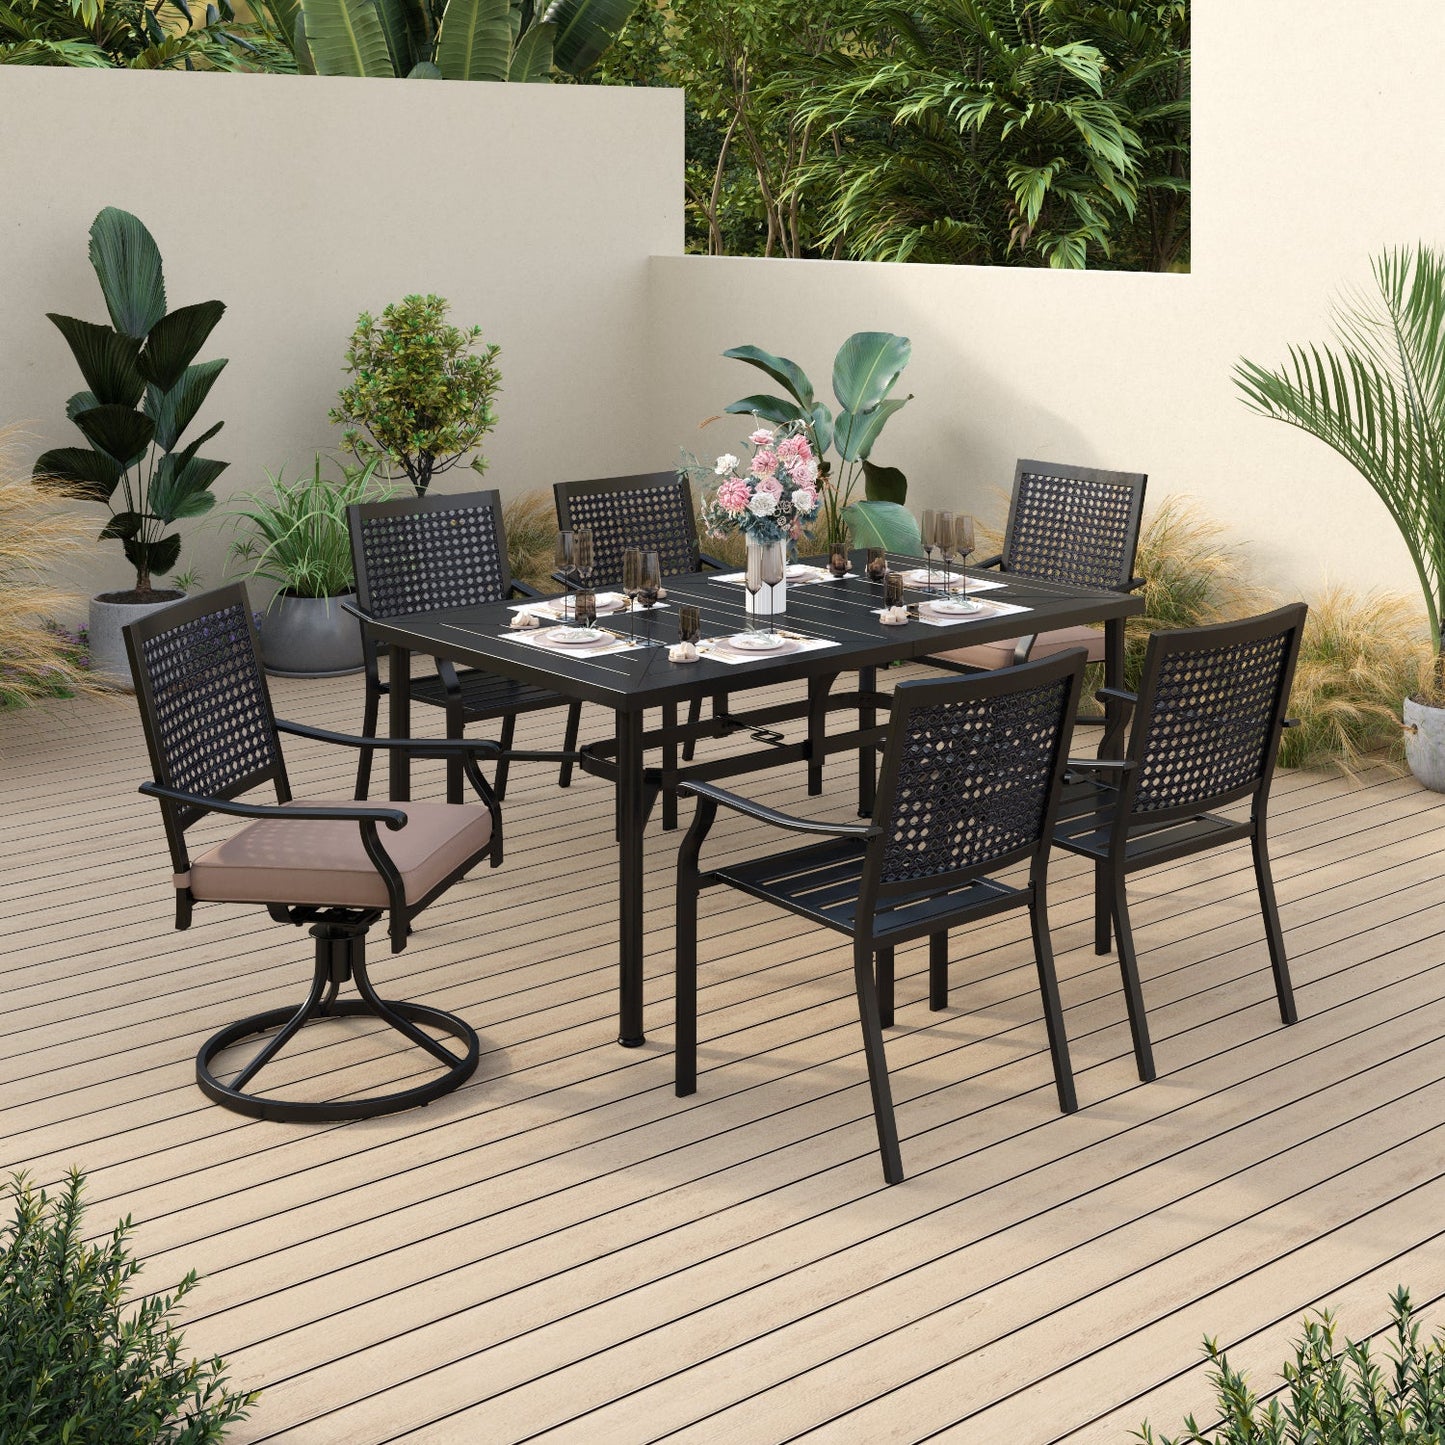 Sophia & William 7 Piece Outdoor Patio Dining Set with 1 Steel Retangular Table&5 Metal Stackable Chairs&1 Swivel Dining Chair